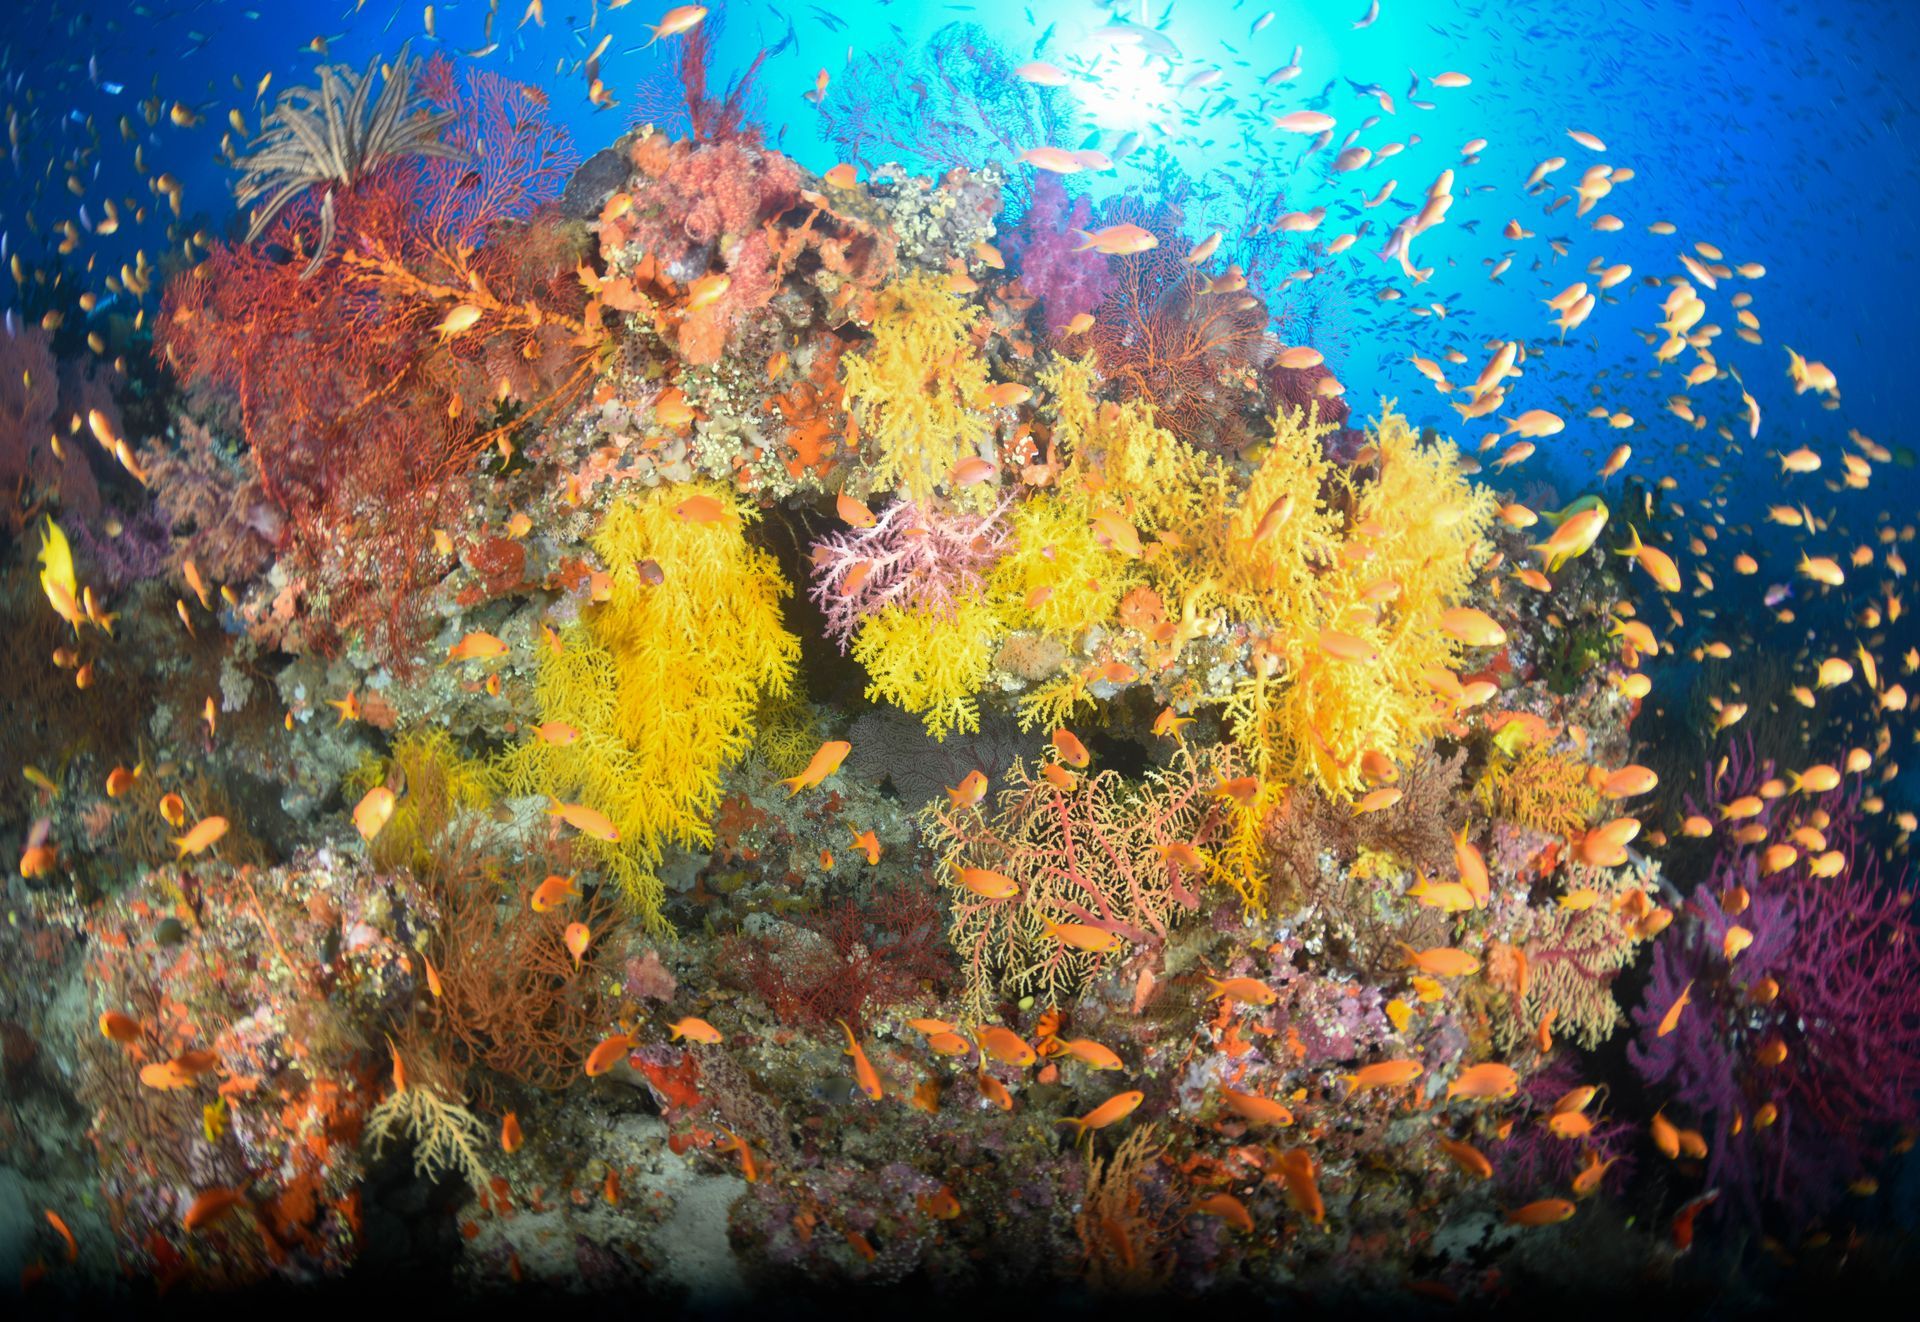 Small orange fish swim over a soft coral reef covered in yellow, red and purple corals in Bligh Water in Fiji , one of the best dives in Fiji called Instant Replay